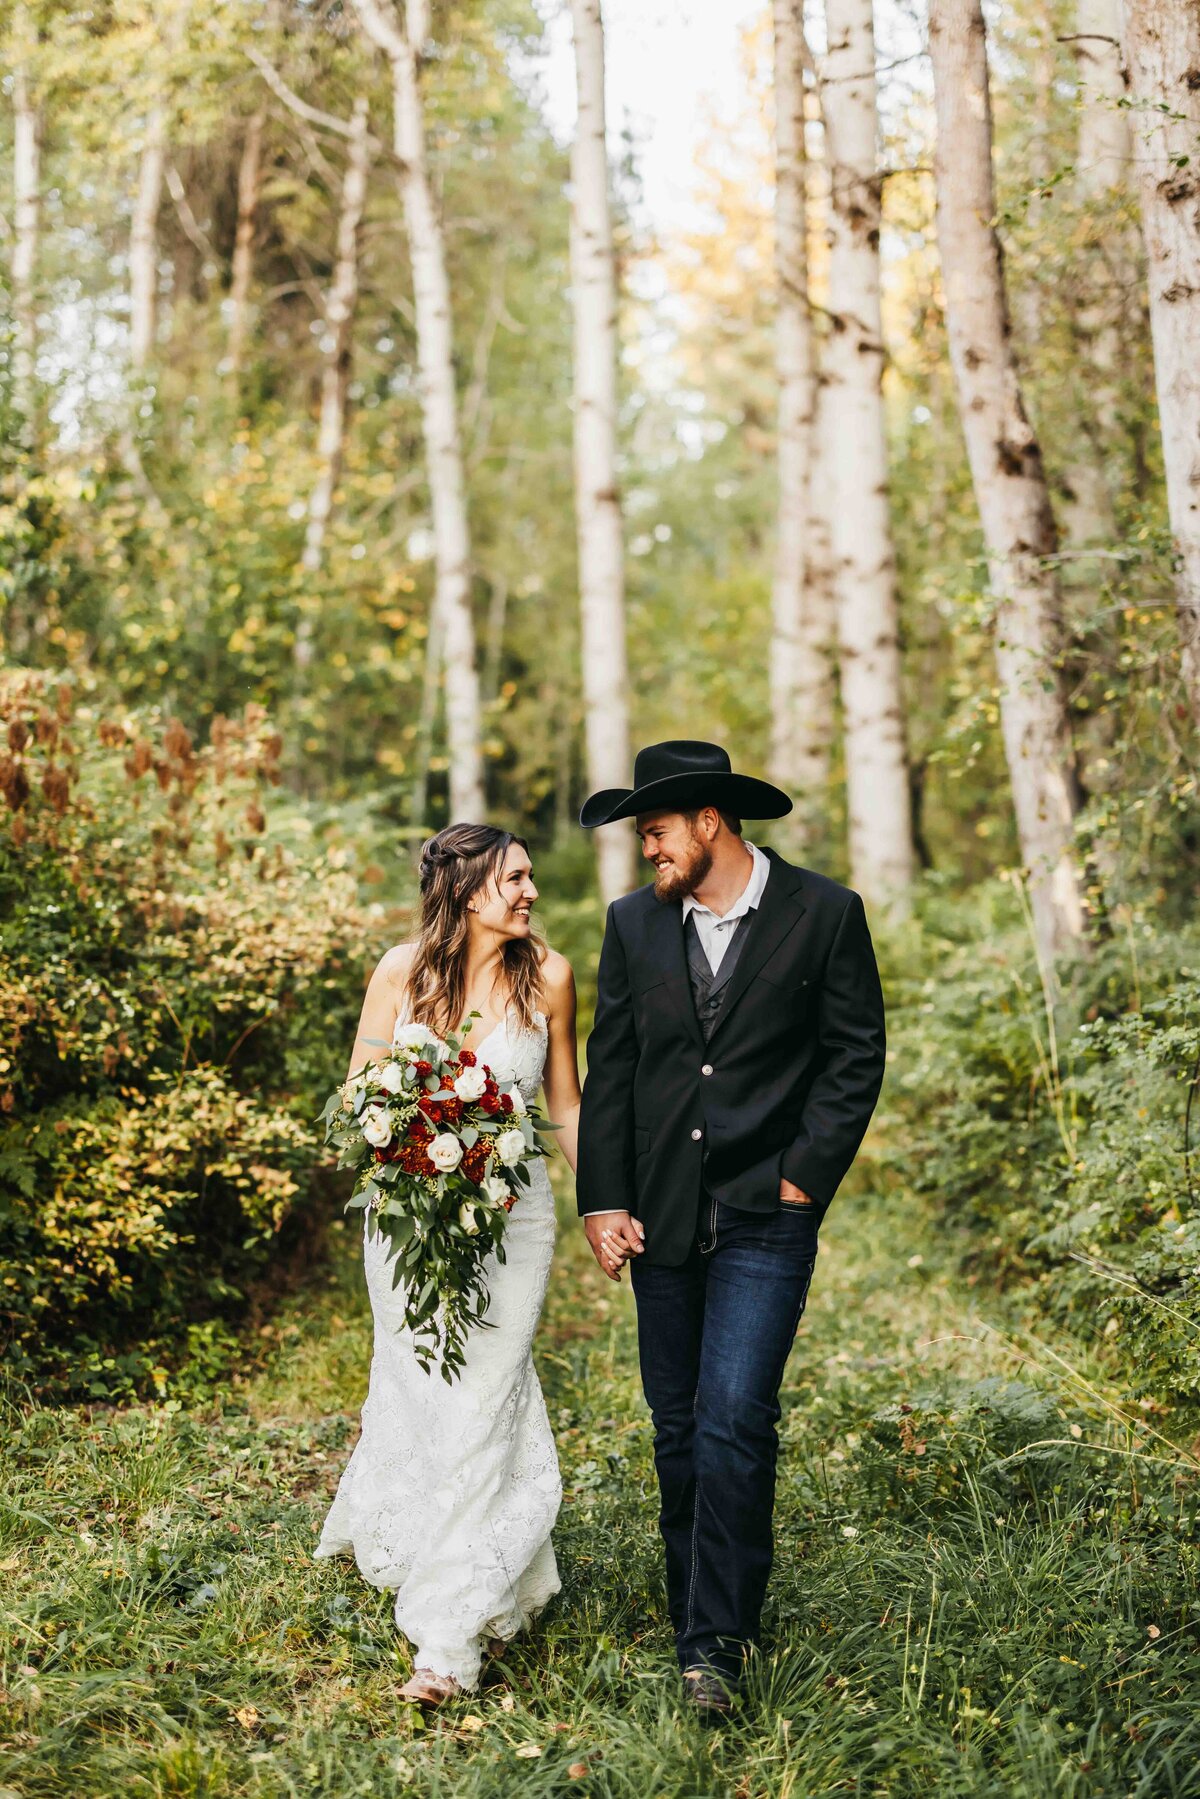 Western Country Wedding in Spokane and Deer Park Washington on a Ranch, Cowboy Hats, Private Vows in the Woods - Clara Jay Photo-2